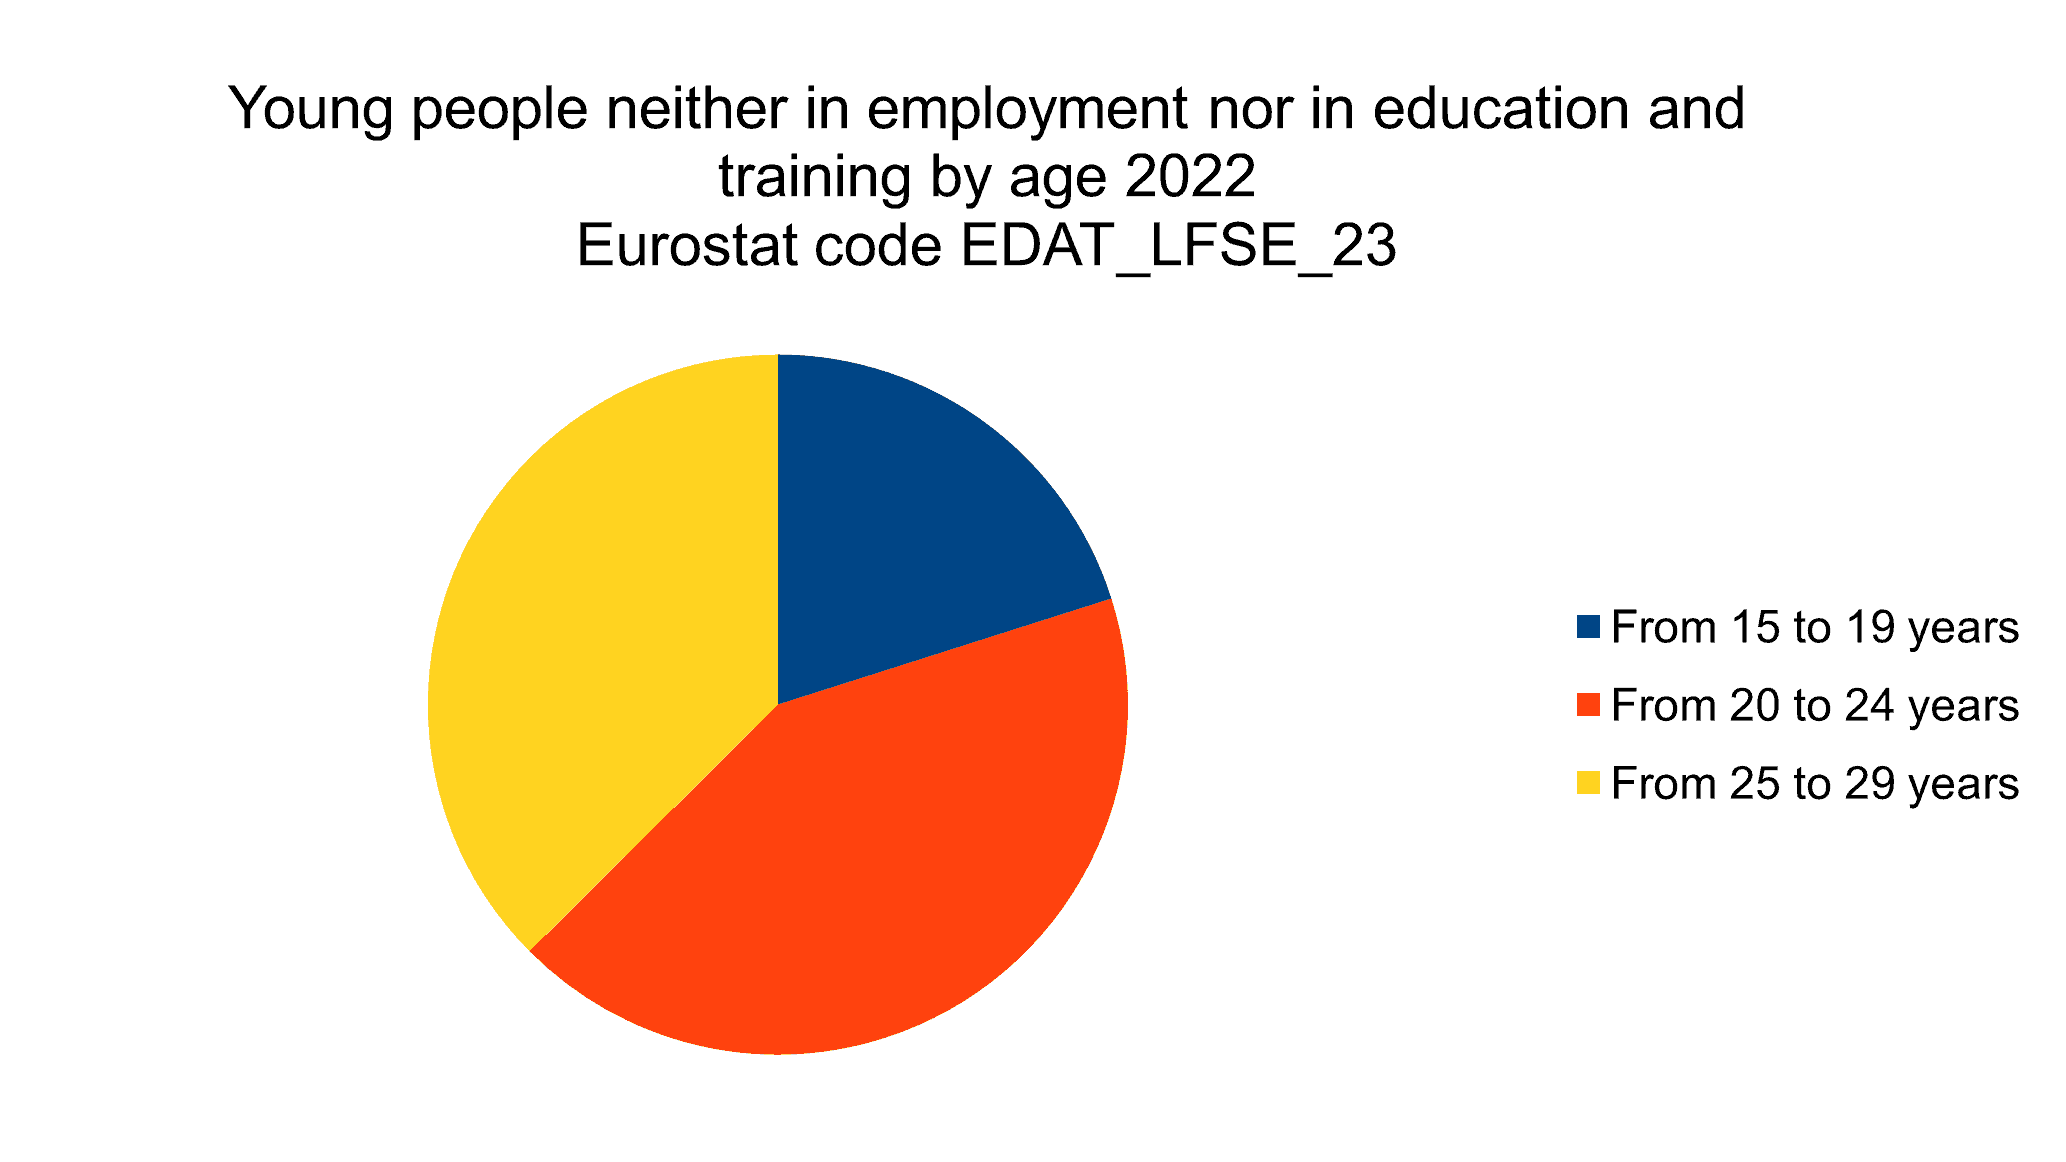 Young people neither in employment nor in edication or training